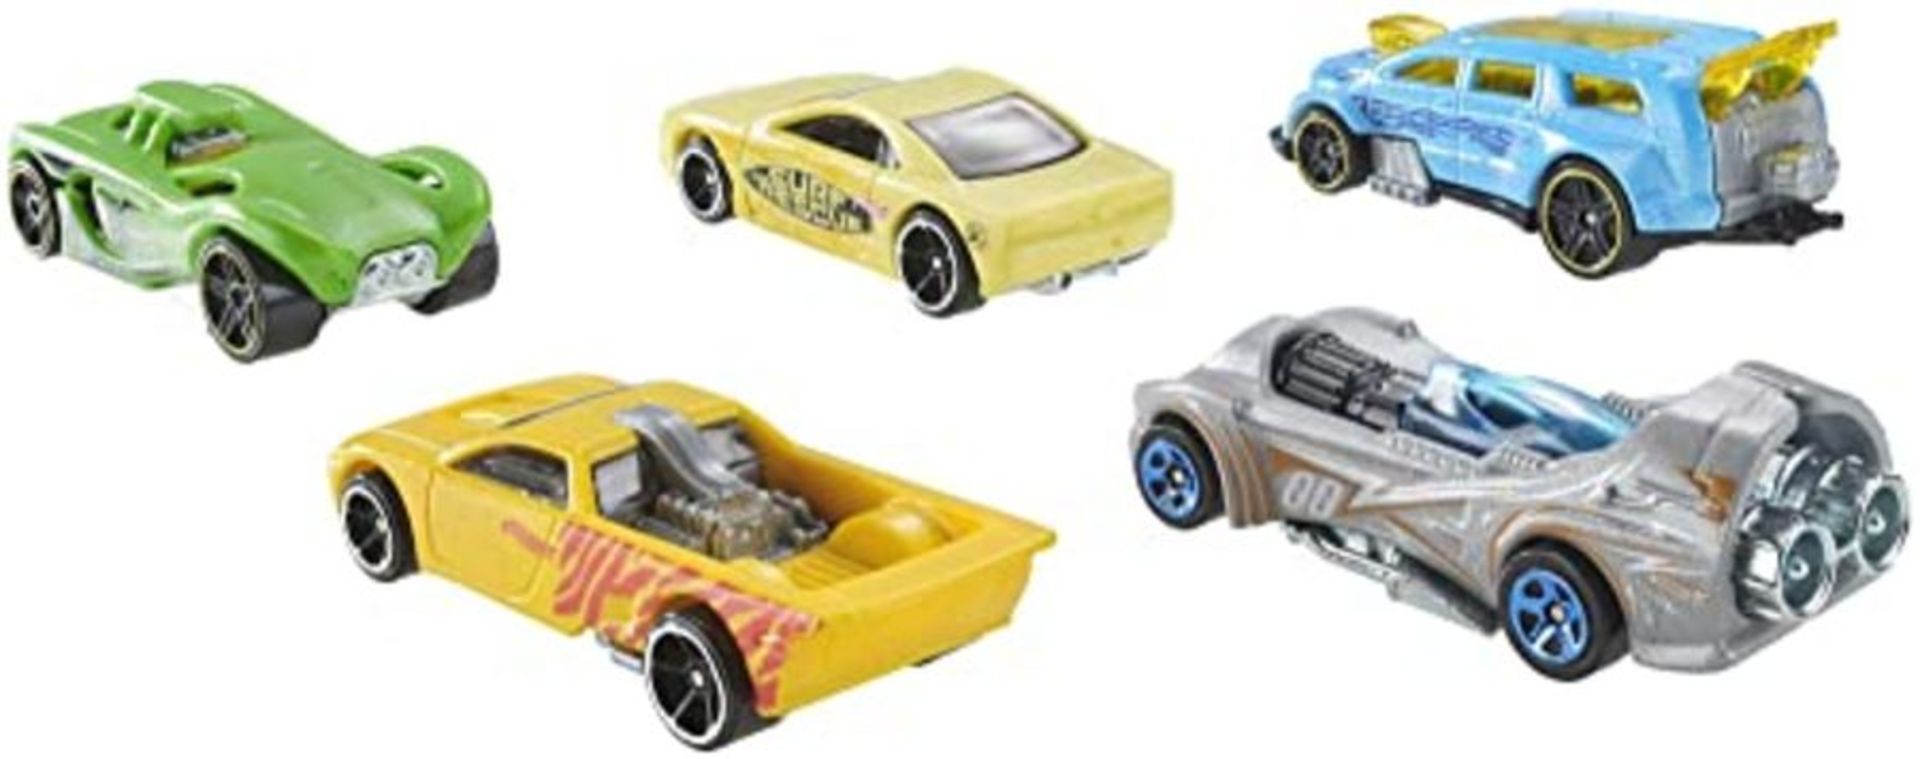 Hot Wheels Color Shifters 5 Car Pack, Color-Change Cars, Dunk Vehicle in Warm & Ice Co